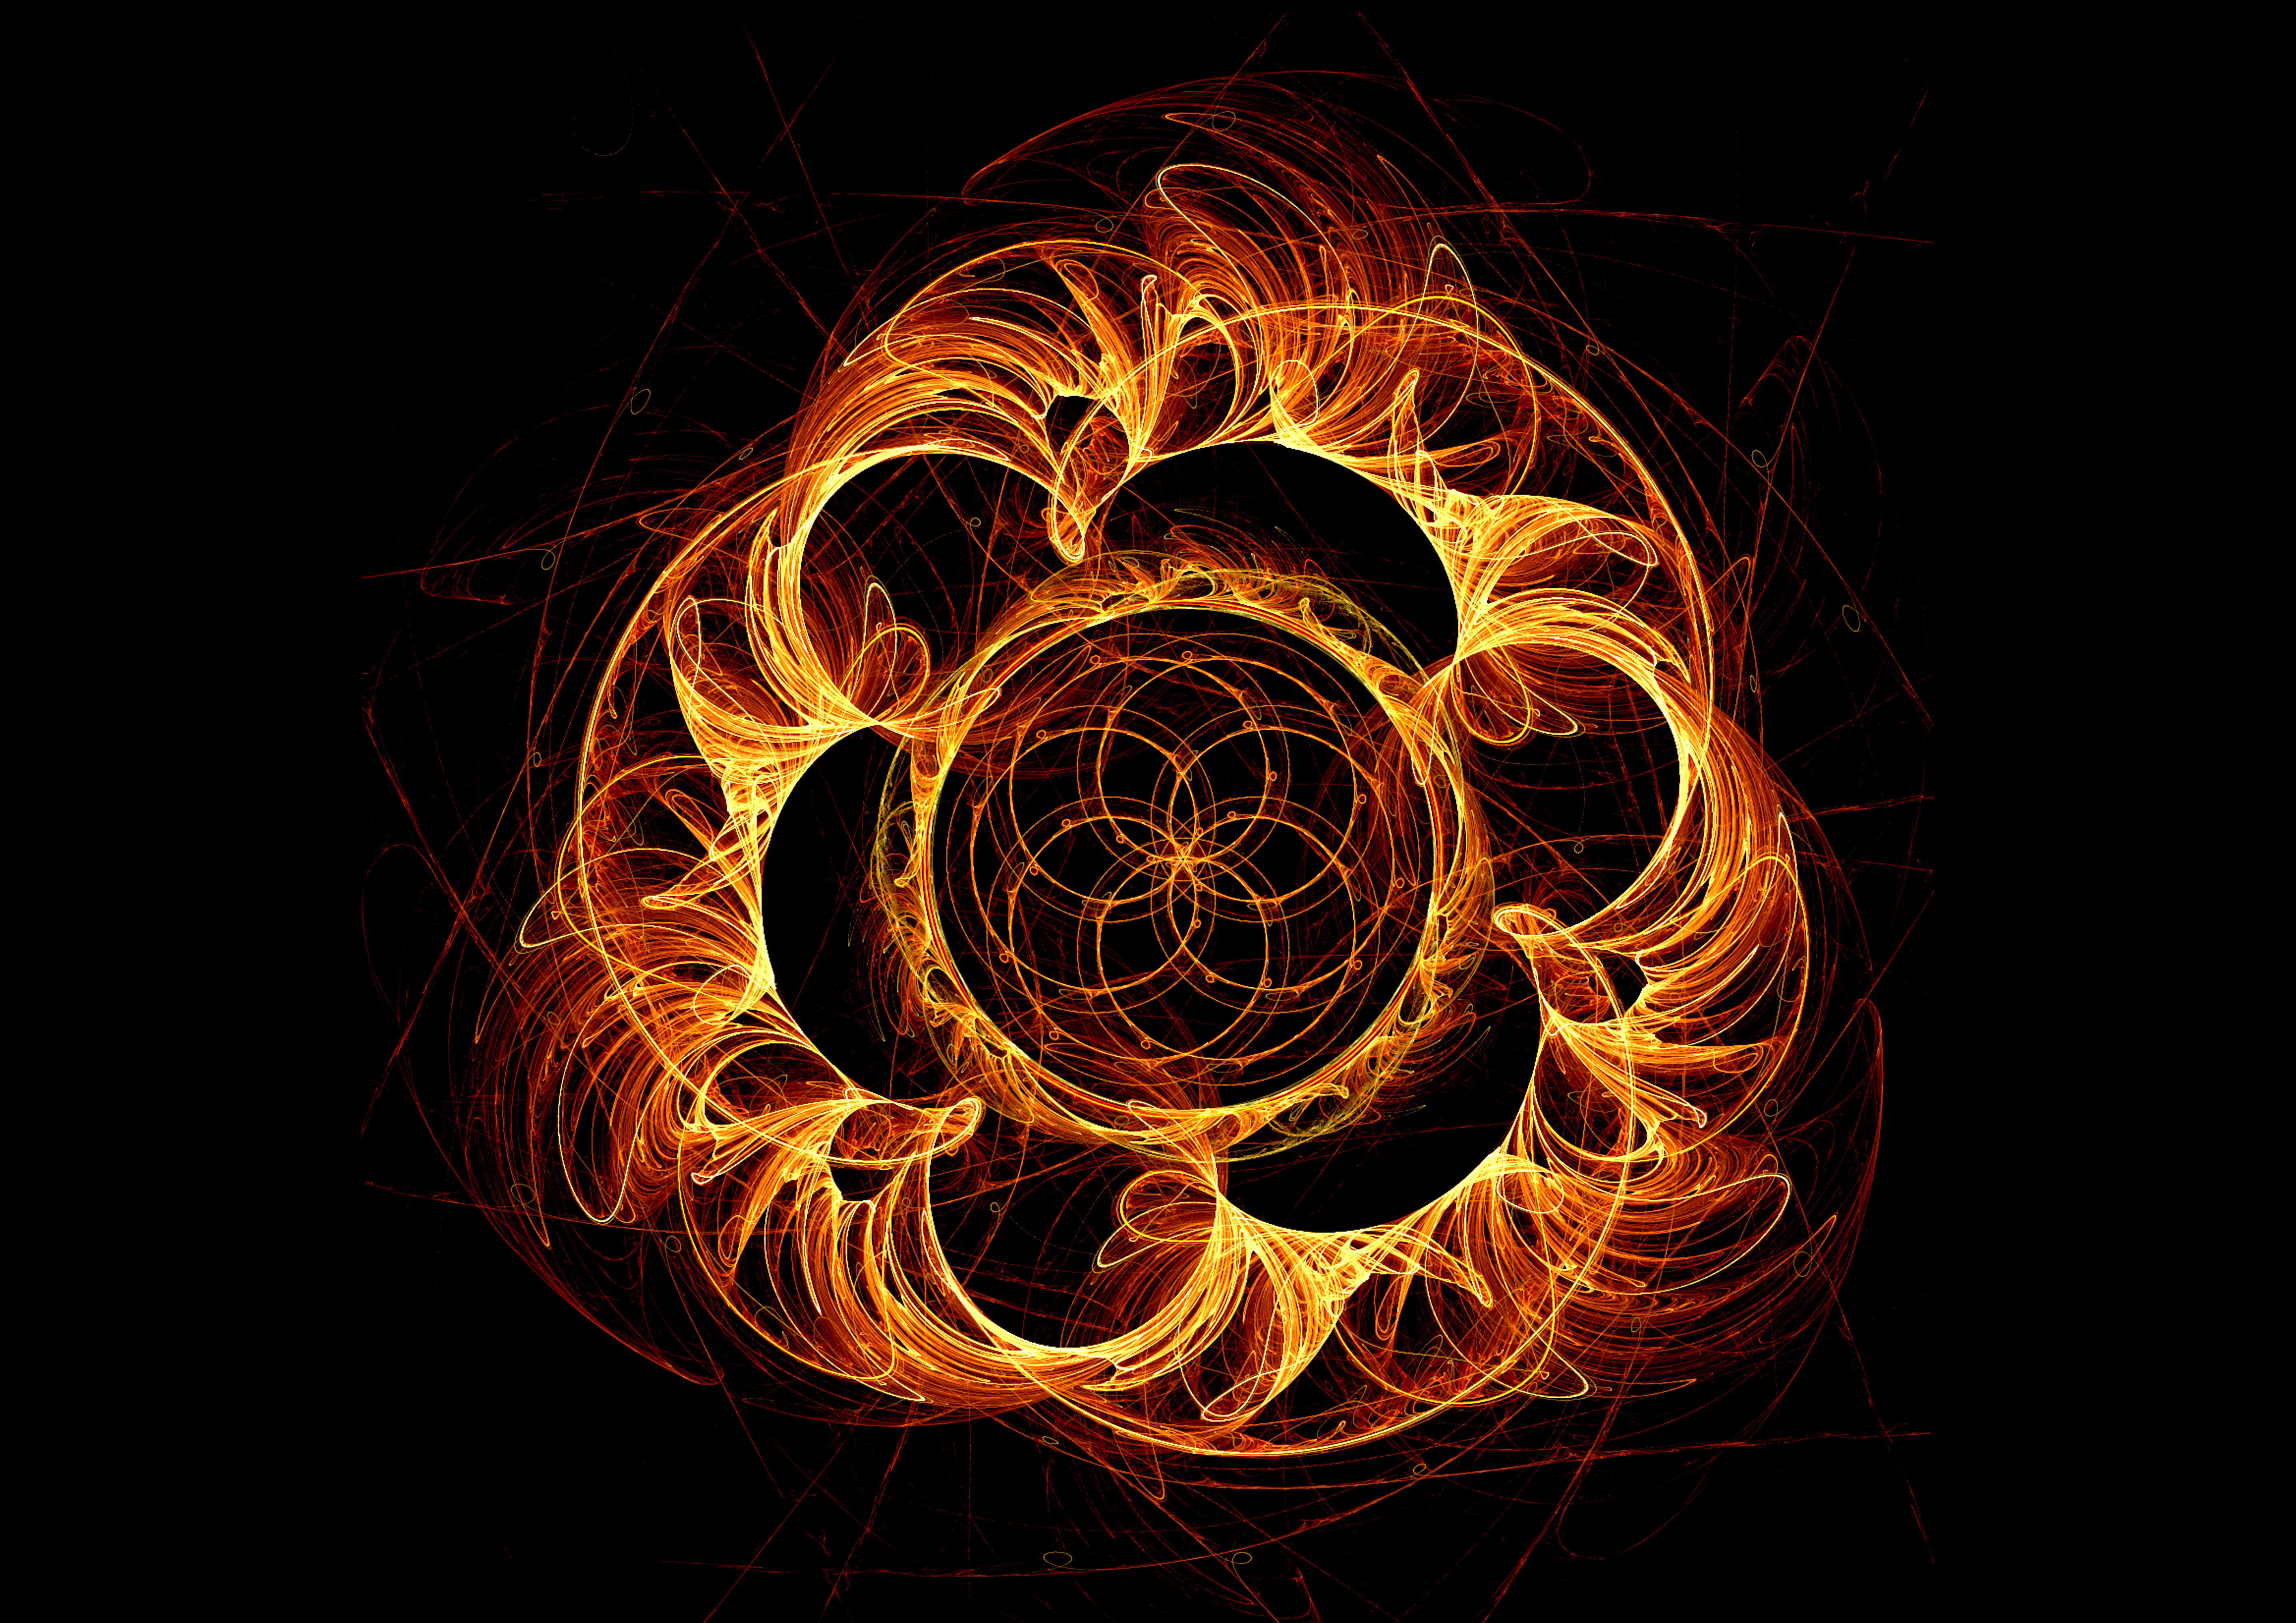 abstract, bright, fractal, confused, intricate, flaming, swirling, involute, fiery Ultra HD, Free 4K, 32K